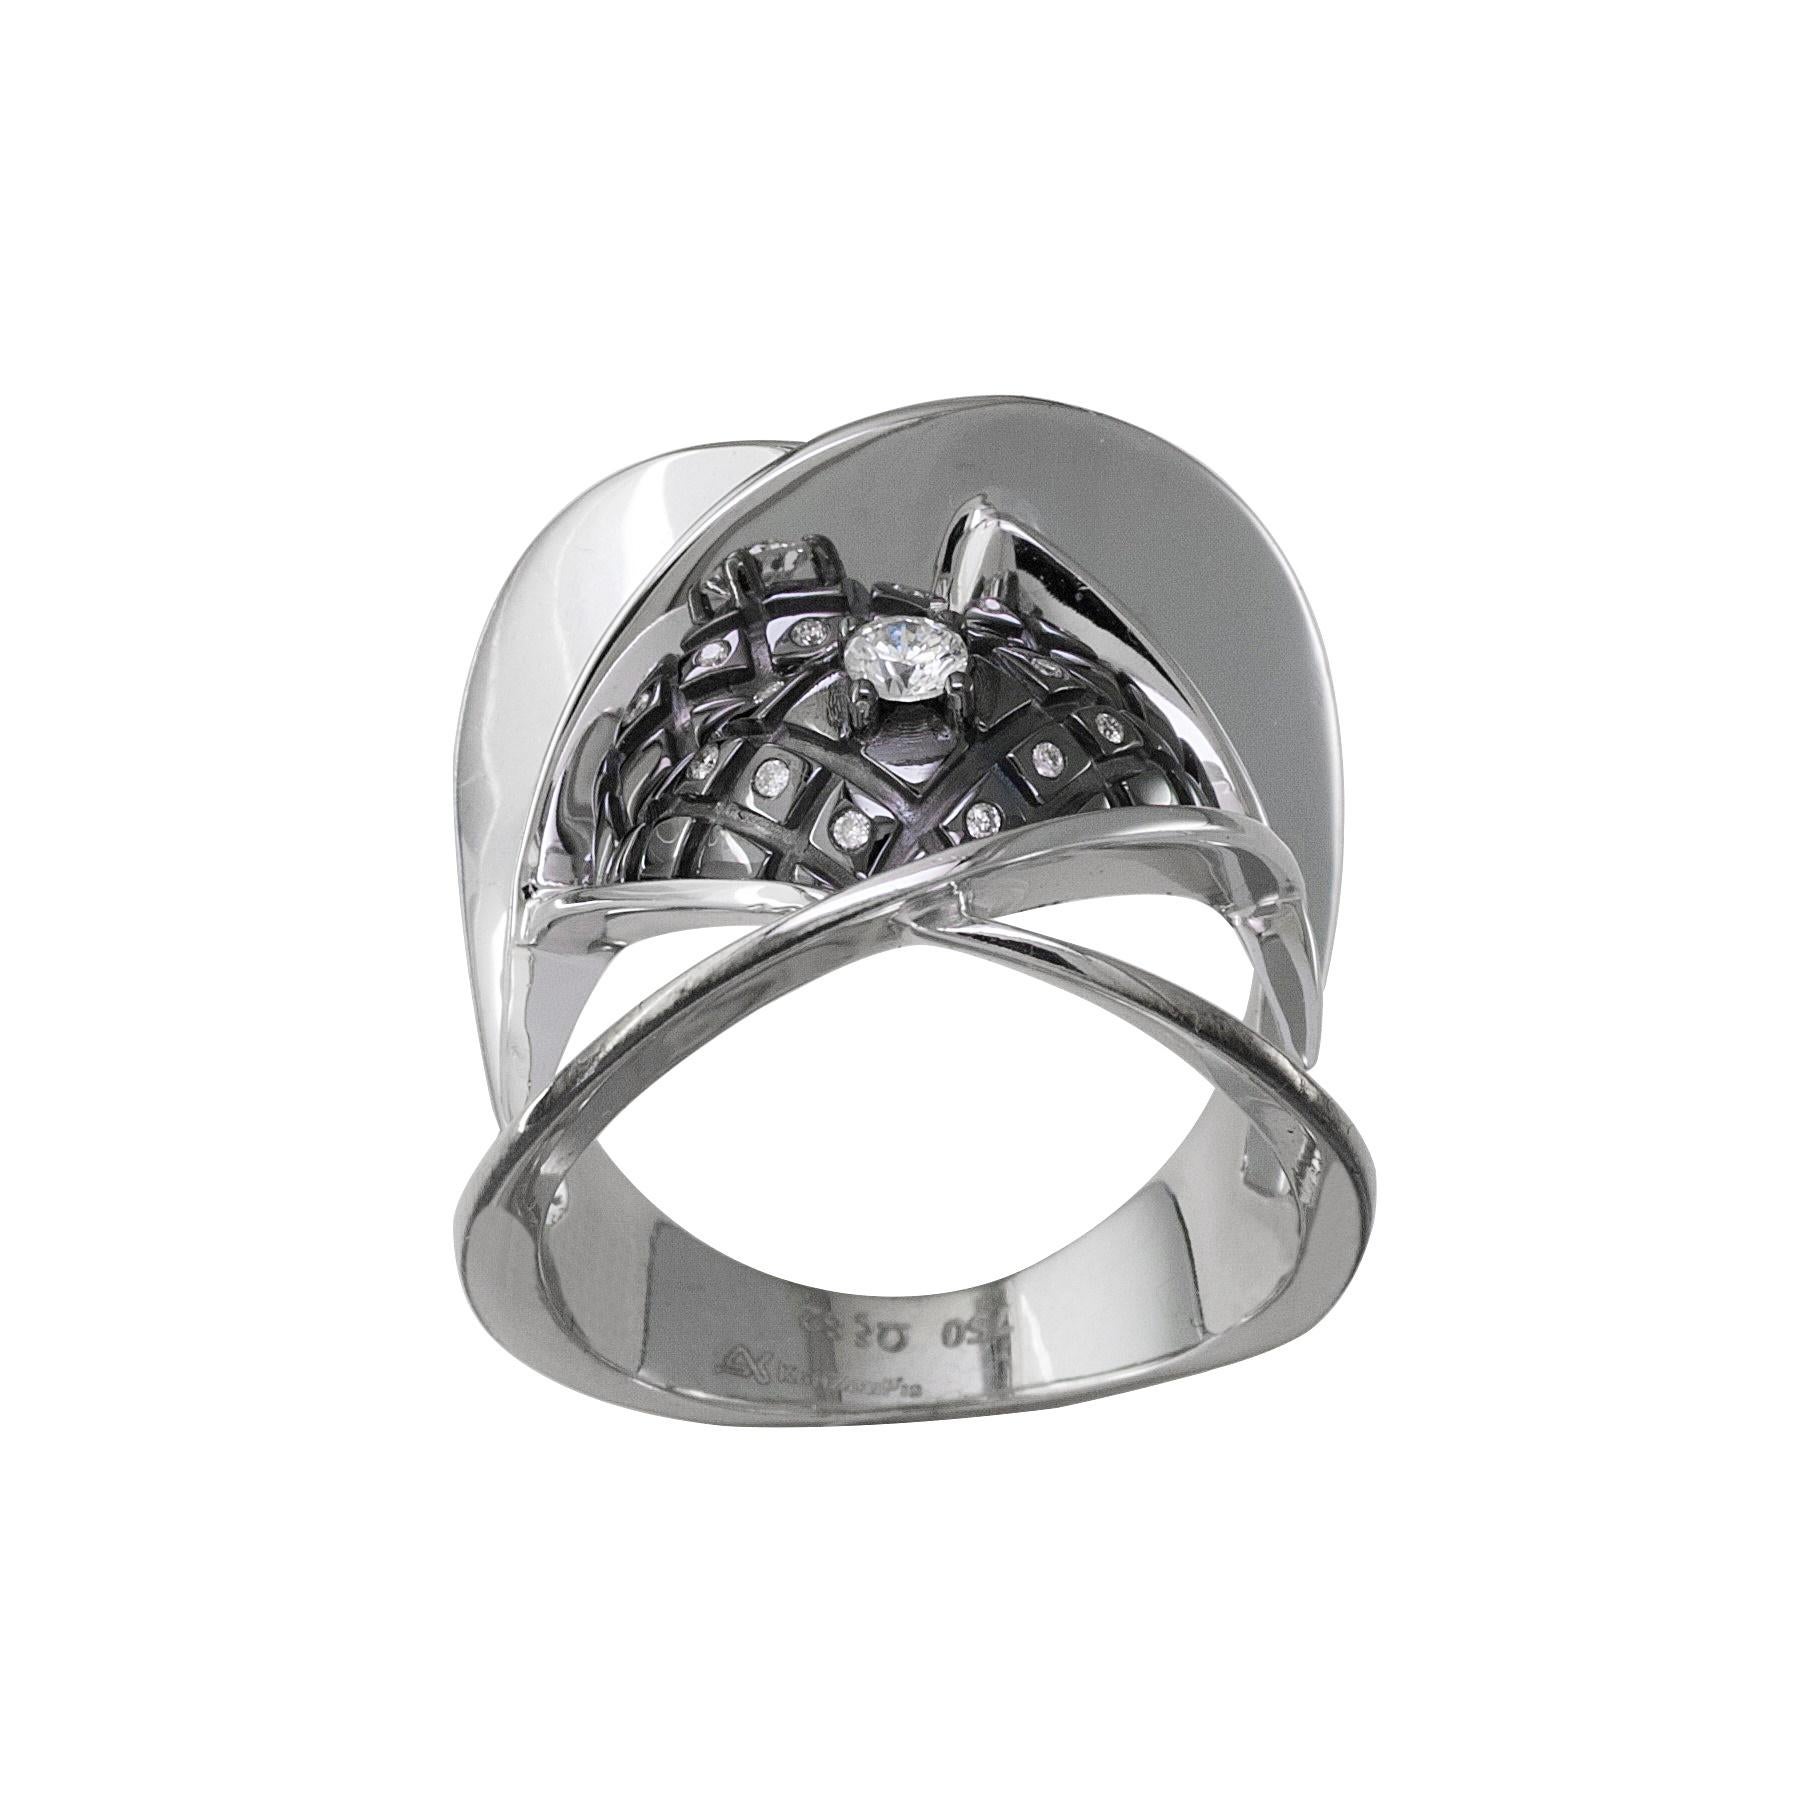 S. Georgios 18 Karat White Gold Diamond Ring which is Designed with Architectural precision. 
The stunning ring is unique as a design and features White Brilliant cut Diamonds total weight of 0,15 Carat and Black Rhodium prongs and background done